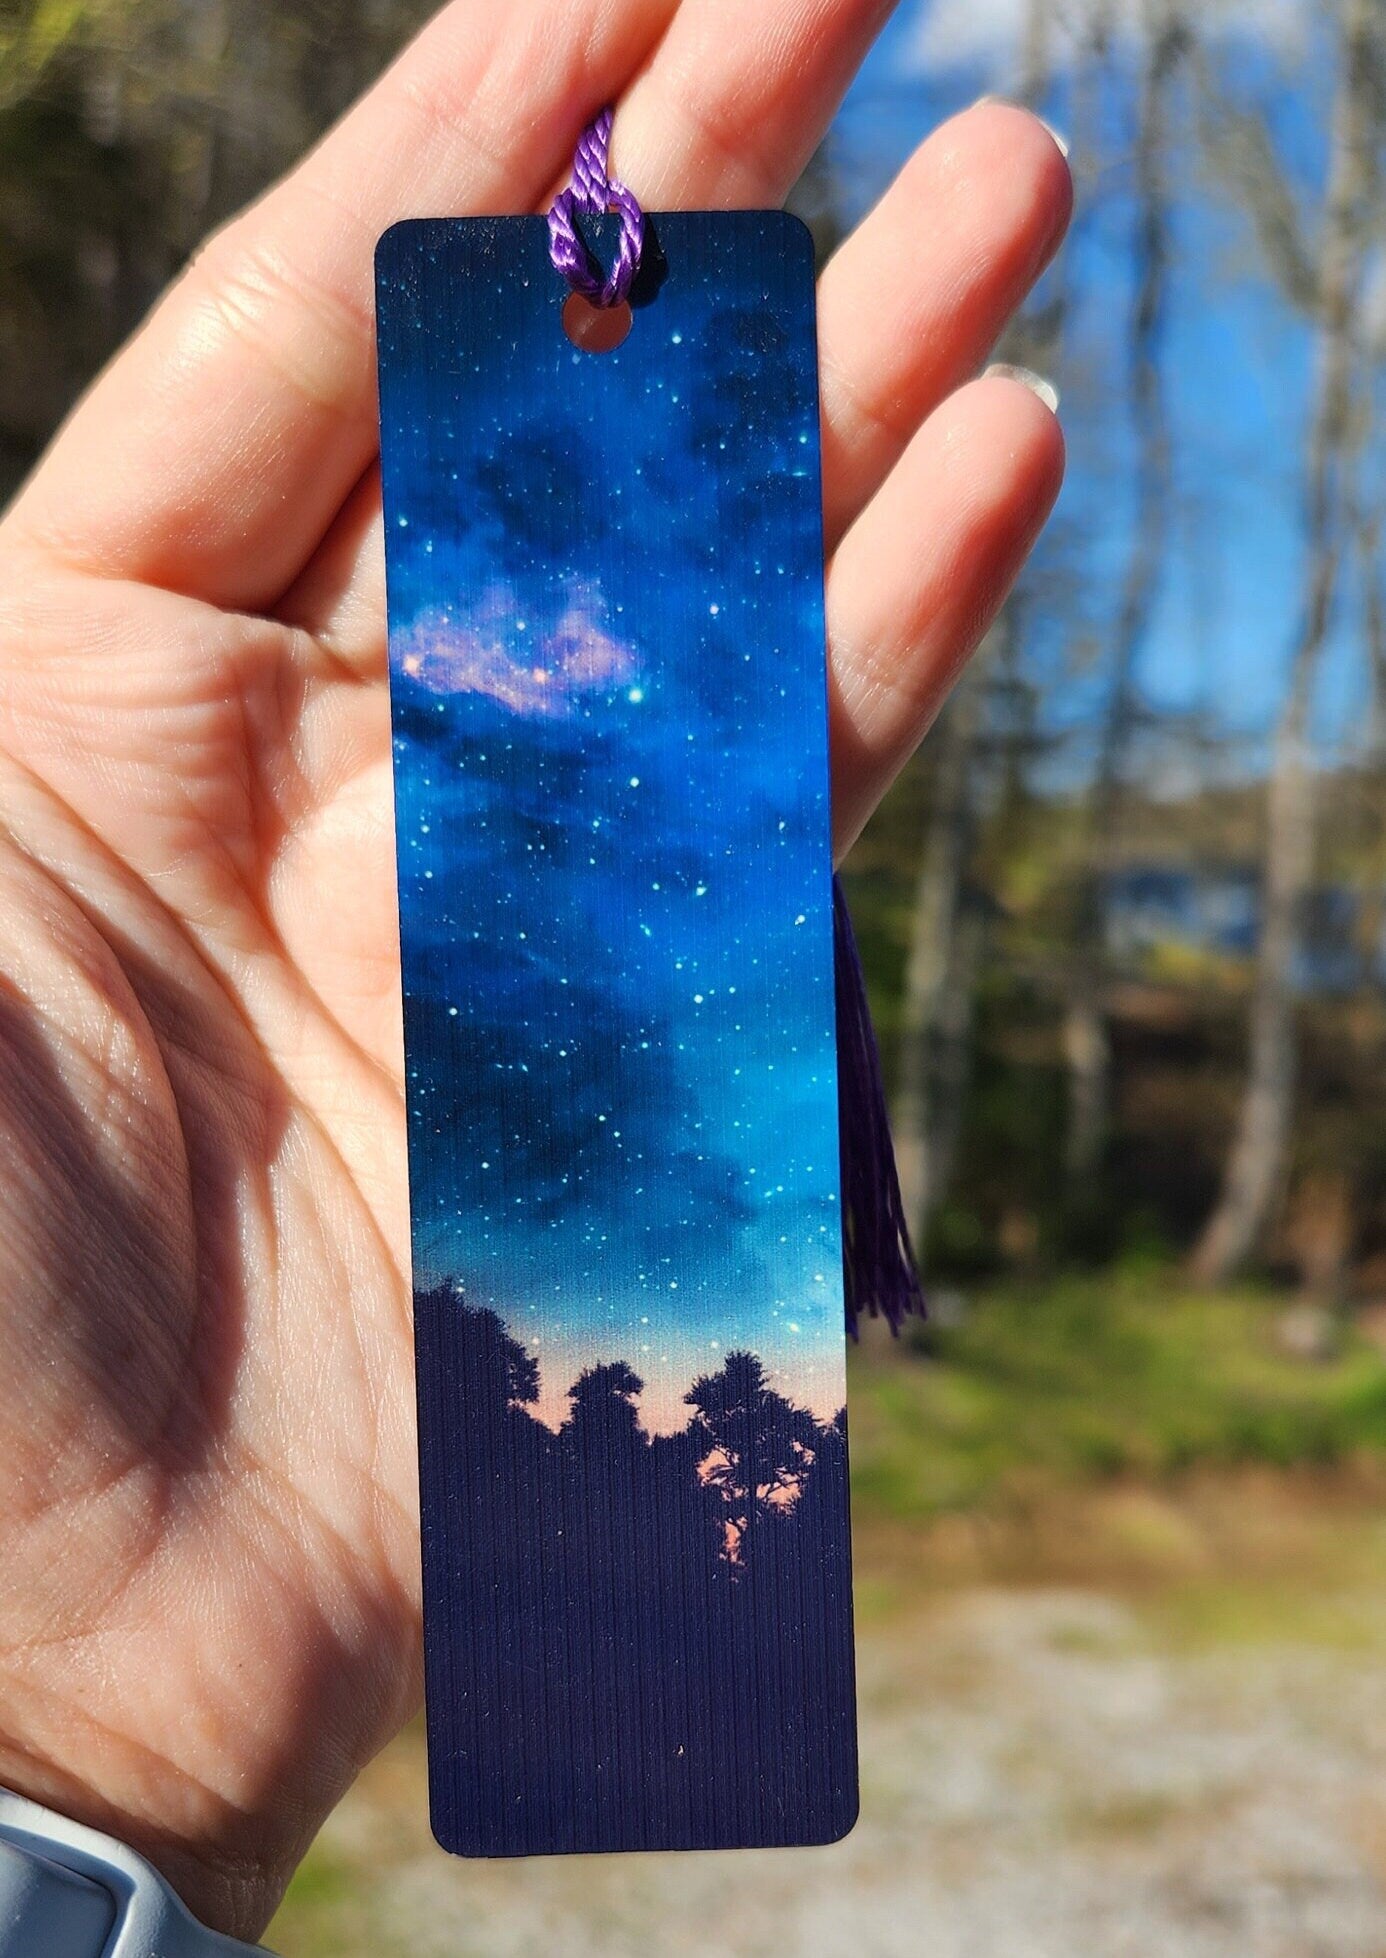 Small Single Sided Aluminum Metal Bookmark with Tassel - 4.7 in x 1.25 in - Galaxy Sunset Sky - Book Lover/Reader's Gift